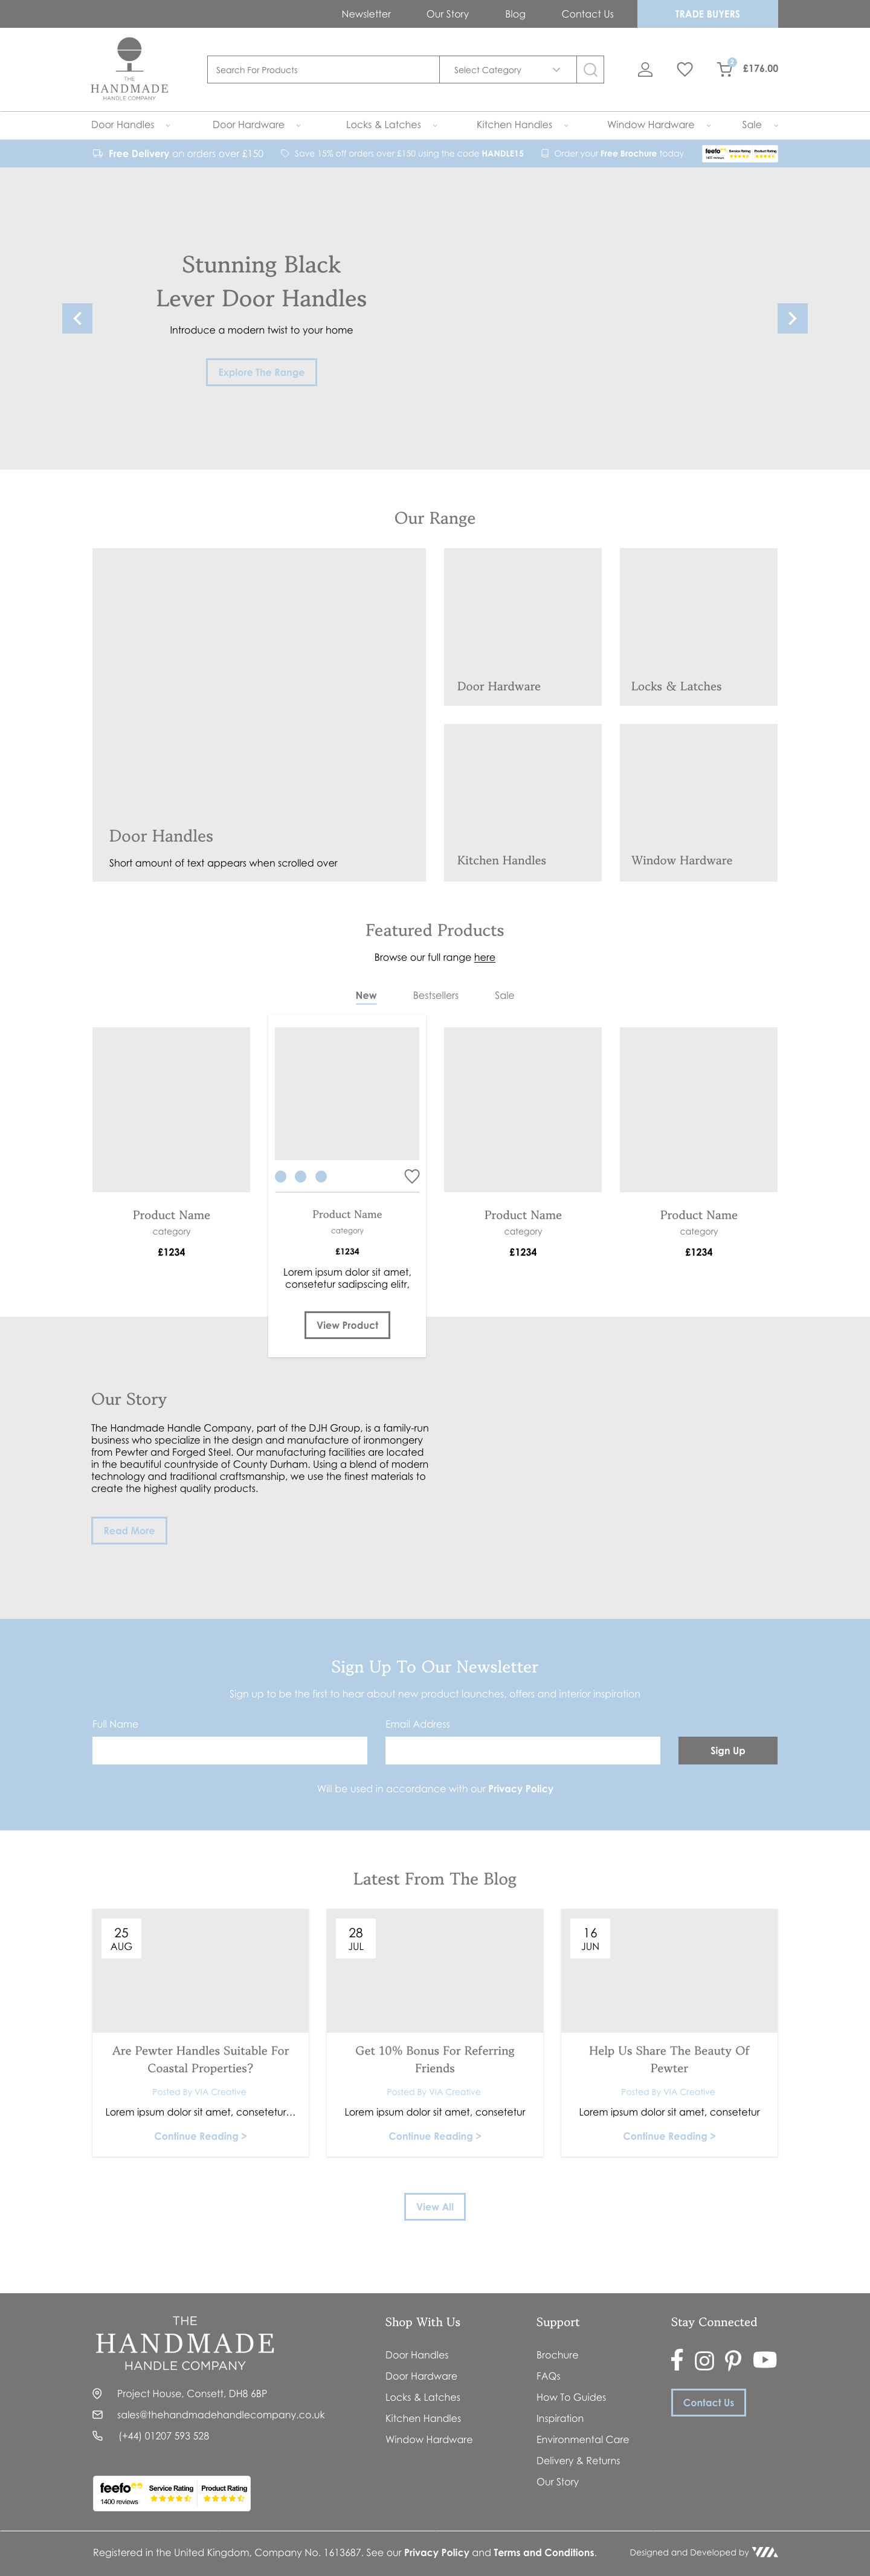 The Handmade Handle Company ecommerce website case study wireframe